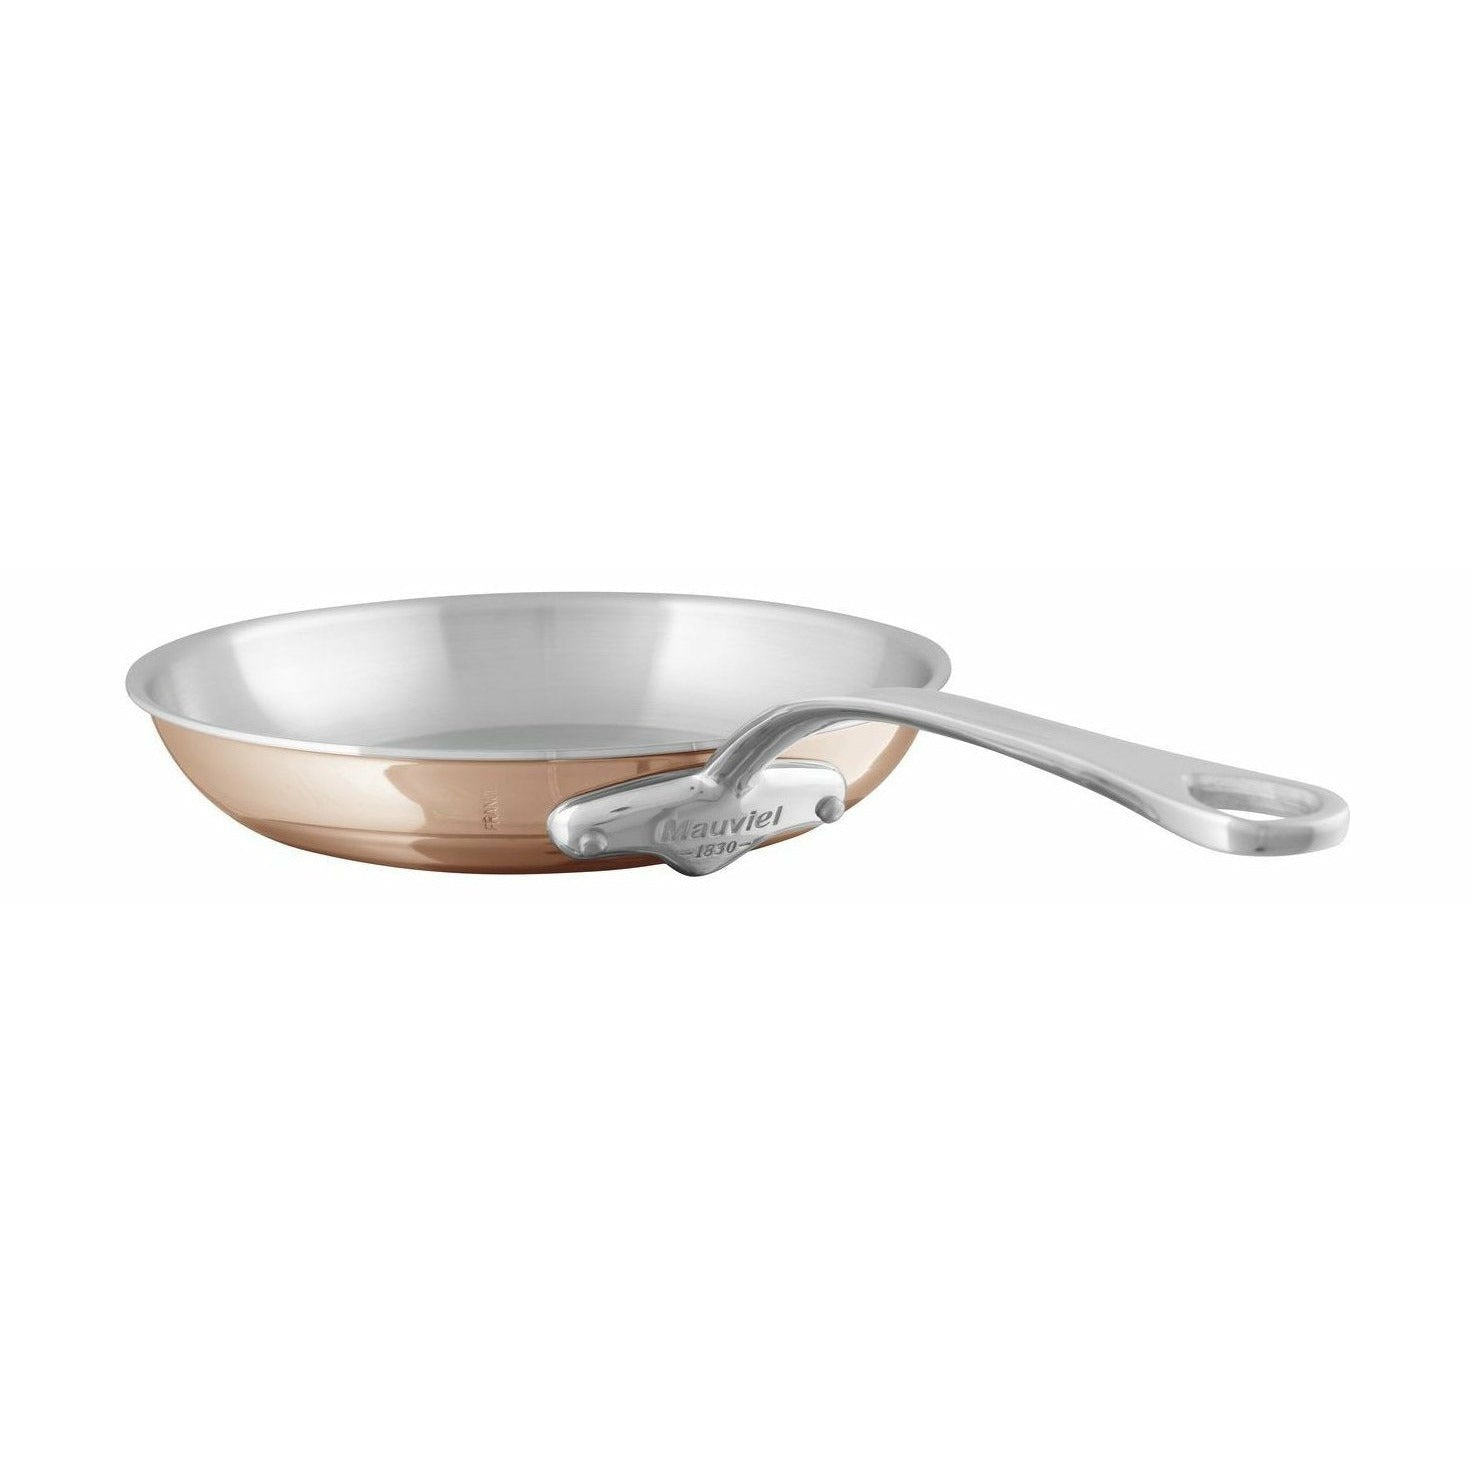 Mauviel M "6s Friture Pan Copper/roestvrij staal, Ø 26 cm